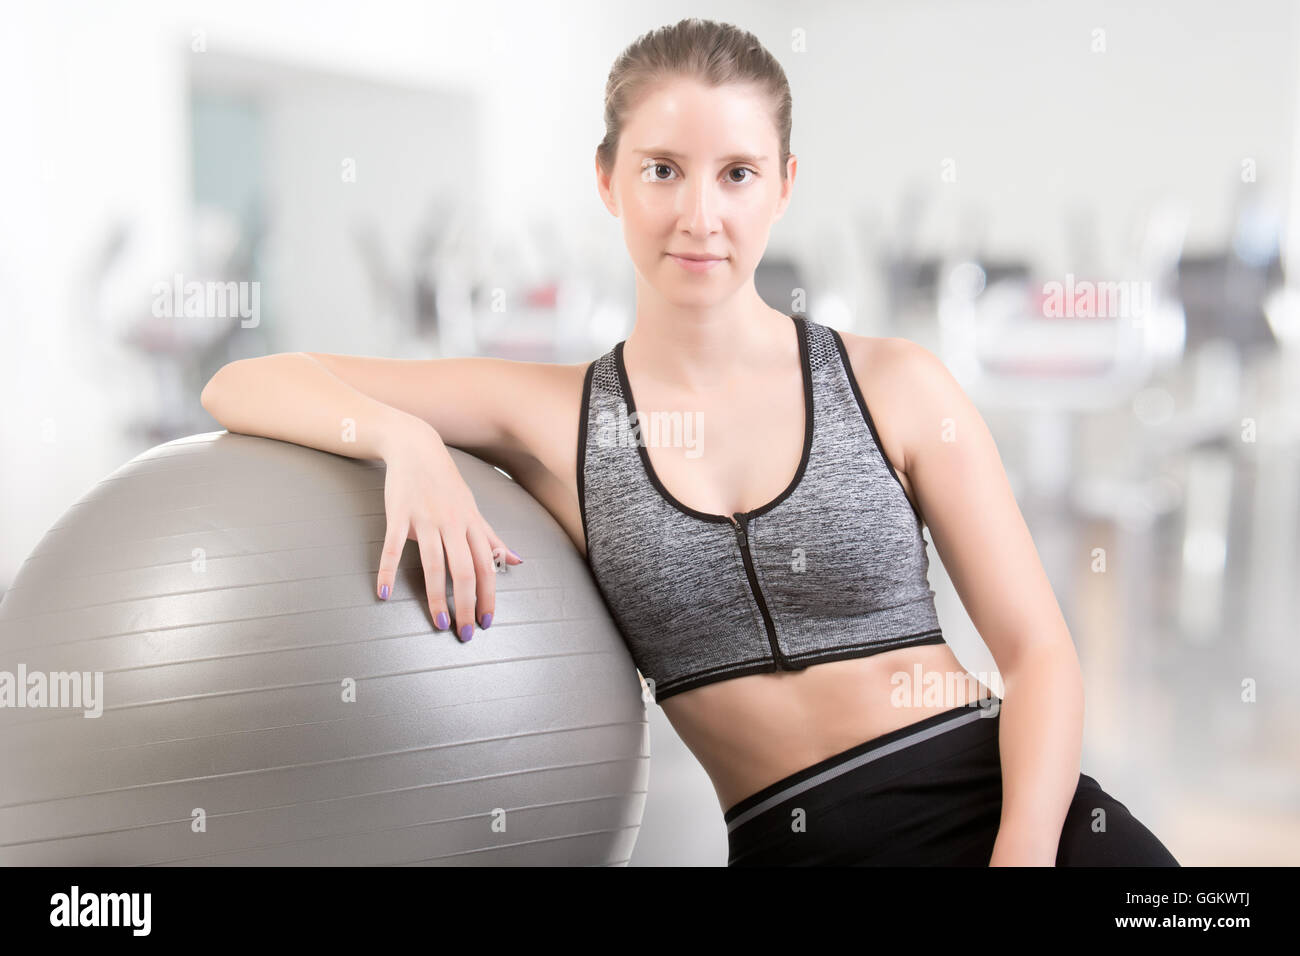 Fit woman standing and holding a pilates ball, in a gym Stock Photo